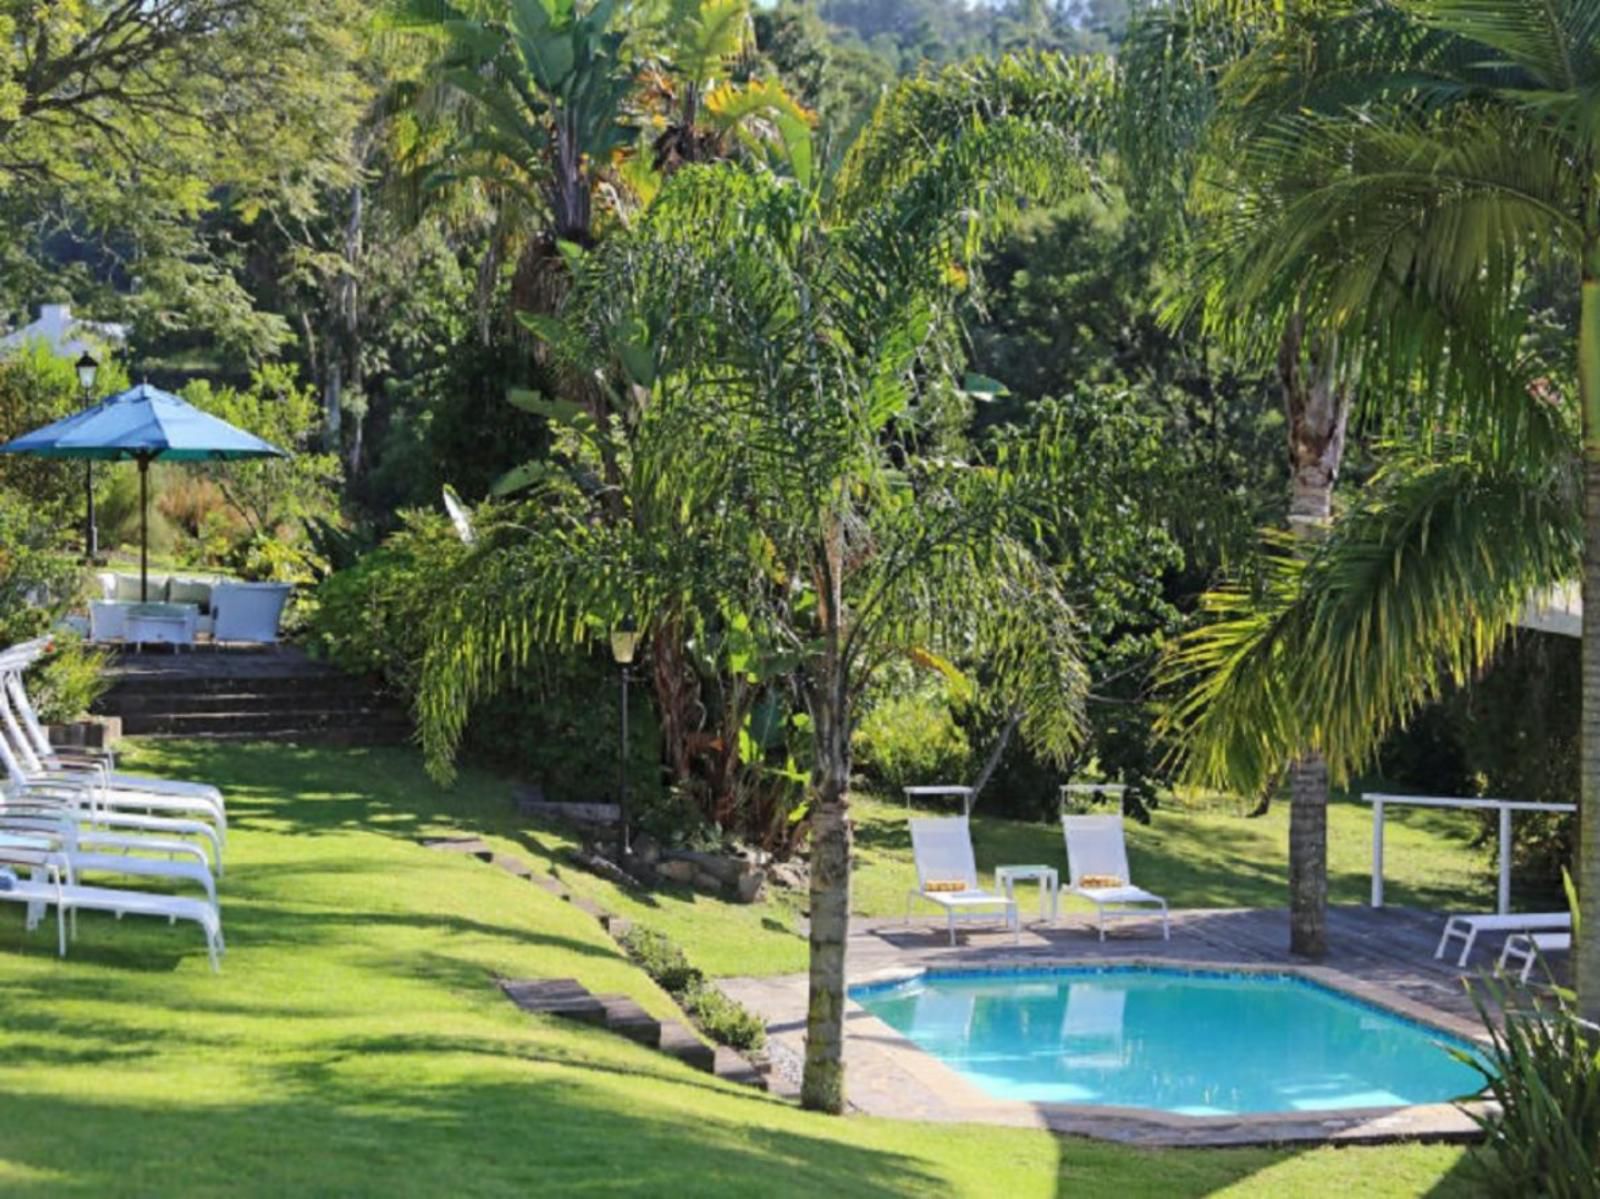 Falcons View Manor Knysna Central Knysna Western Cape South Africa Palm Tree, Plant, Nature, Wood, Garden, Swimming Pool